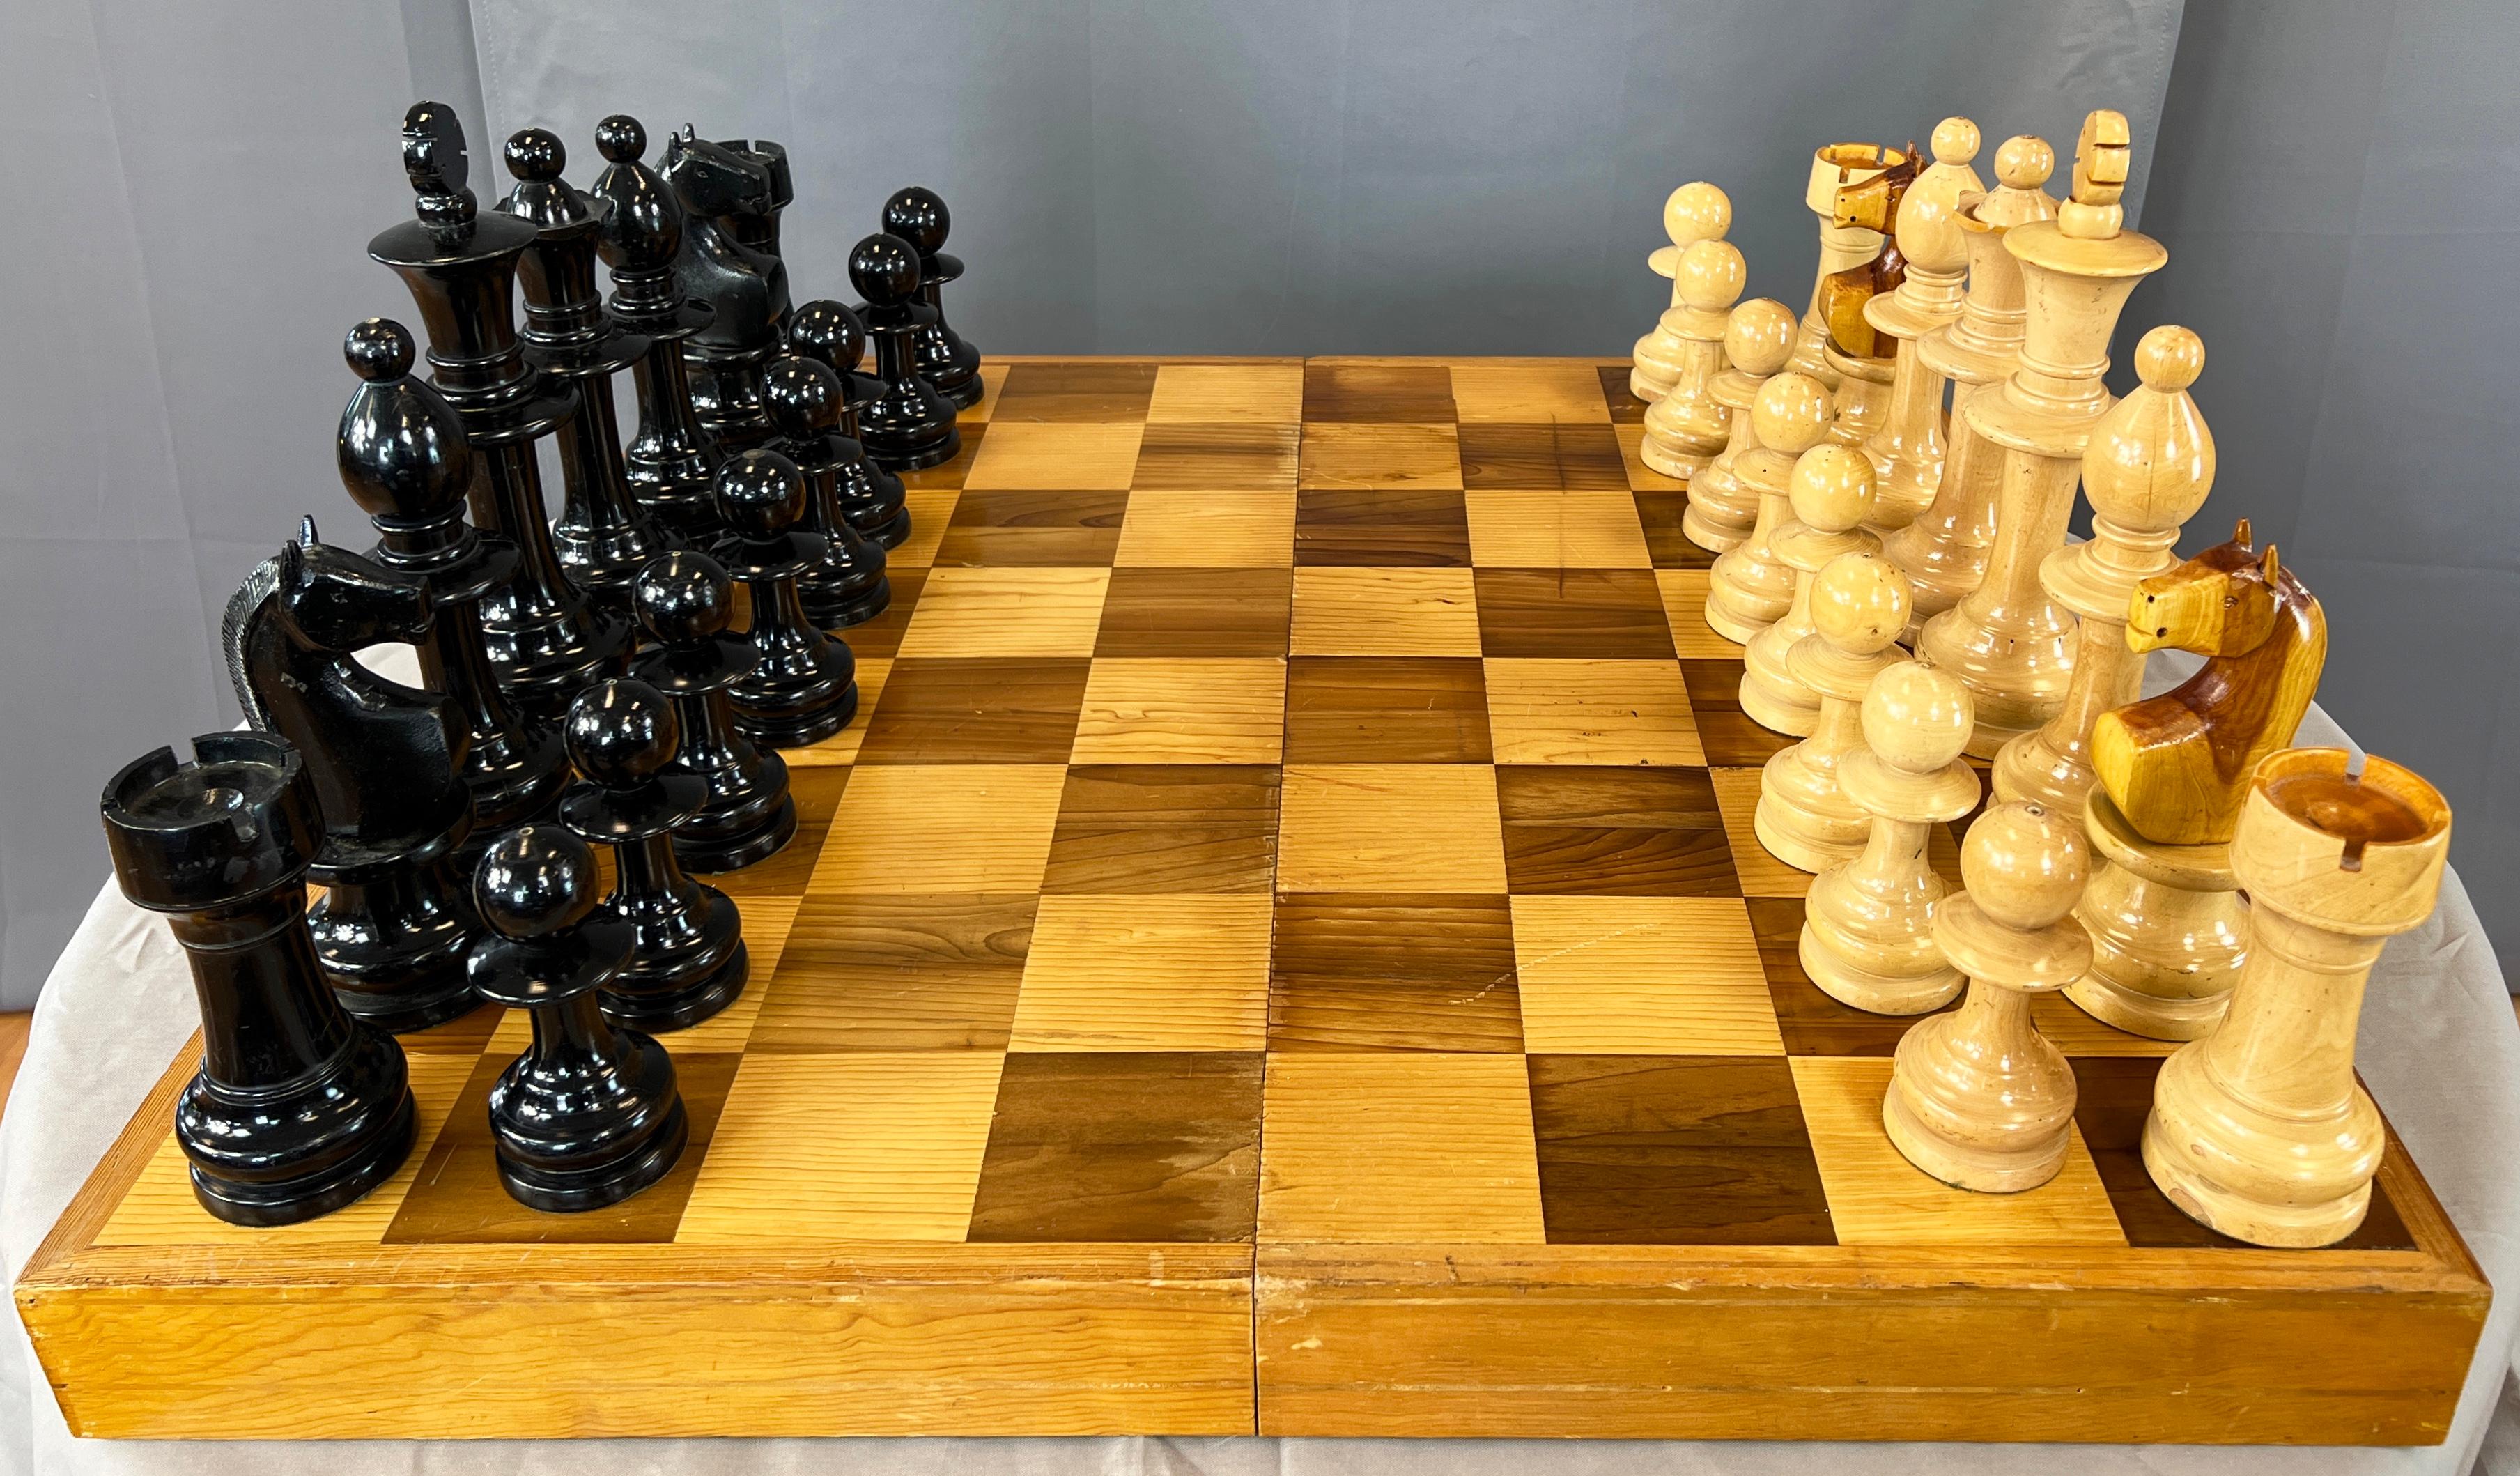 Offered here is monumental hand crafted chess set, it's 33 pieces total including the game board/case.

Artist/craftsman is unknown, set is not signed. Board is also the storage case for the set.

King measurements below are for the King, Queen is